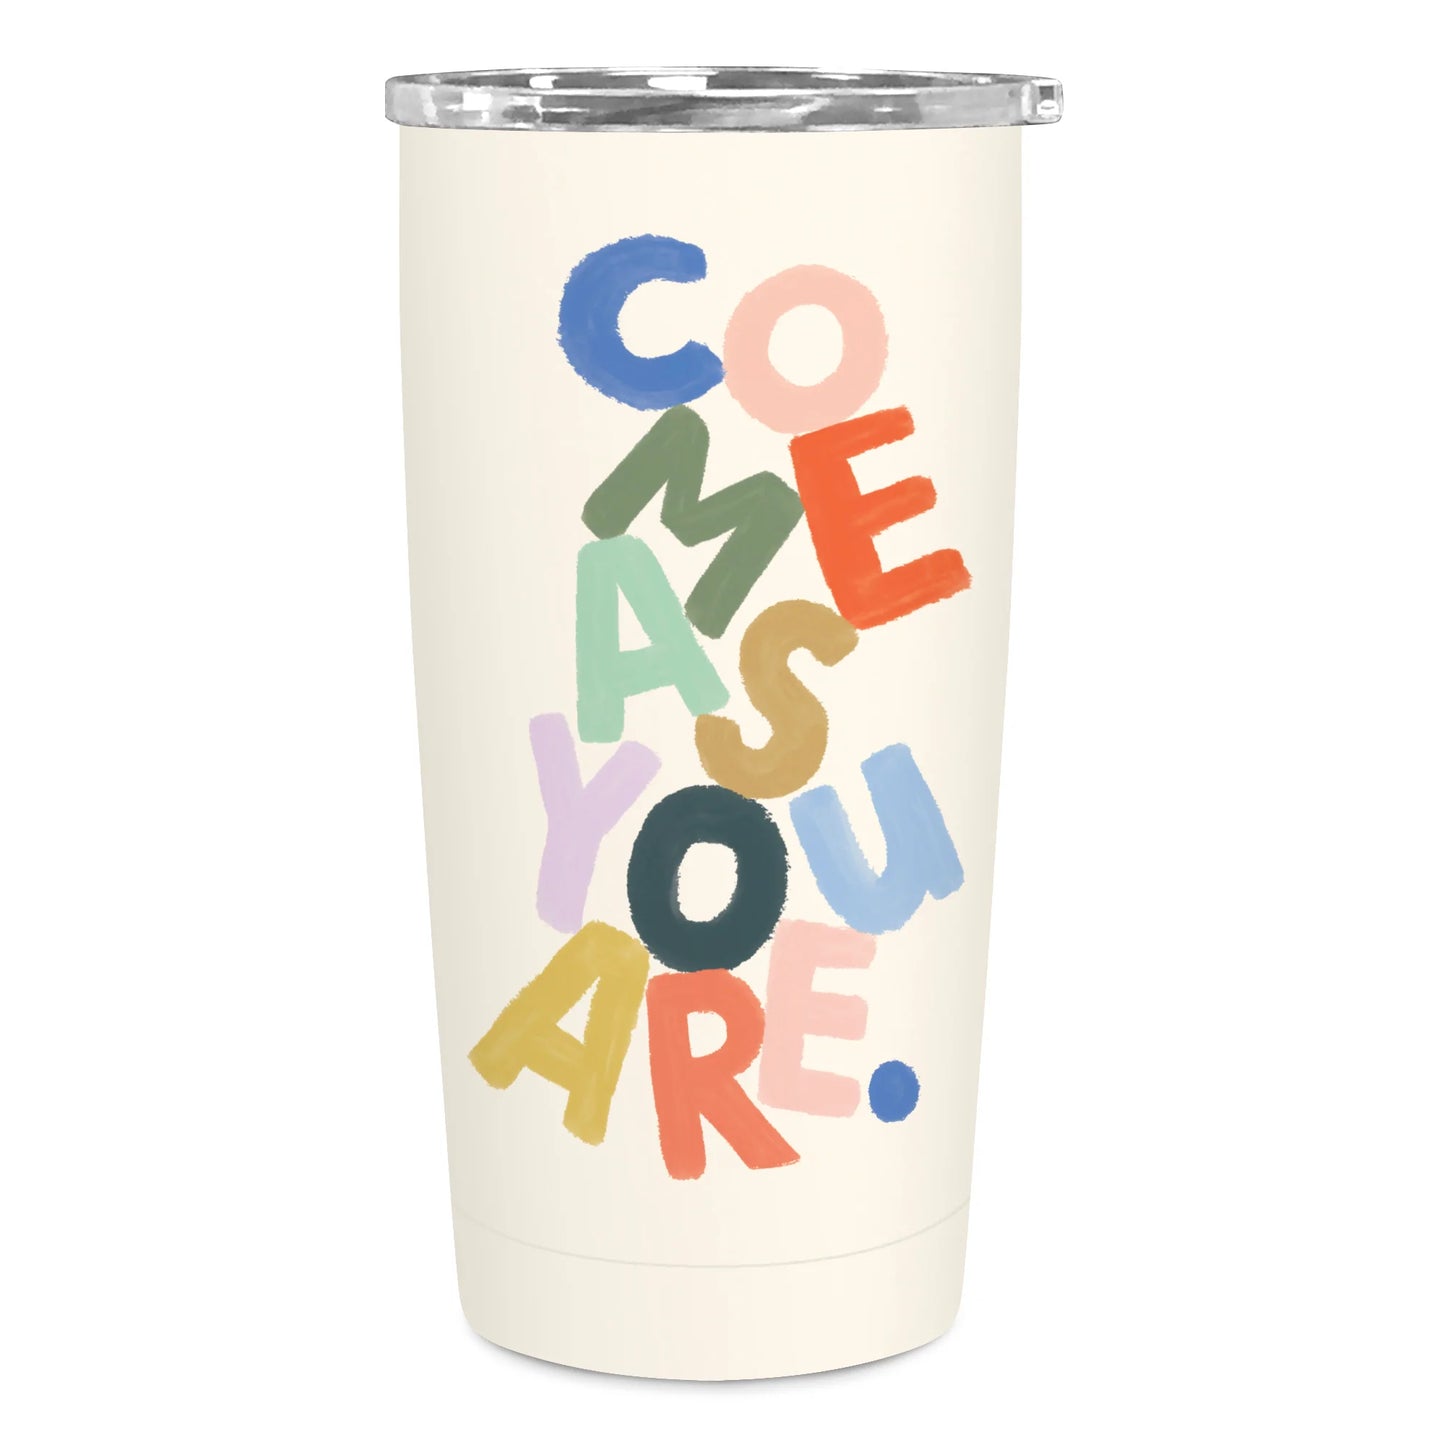 Studio Oh! Tumbler - Come as You Are